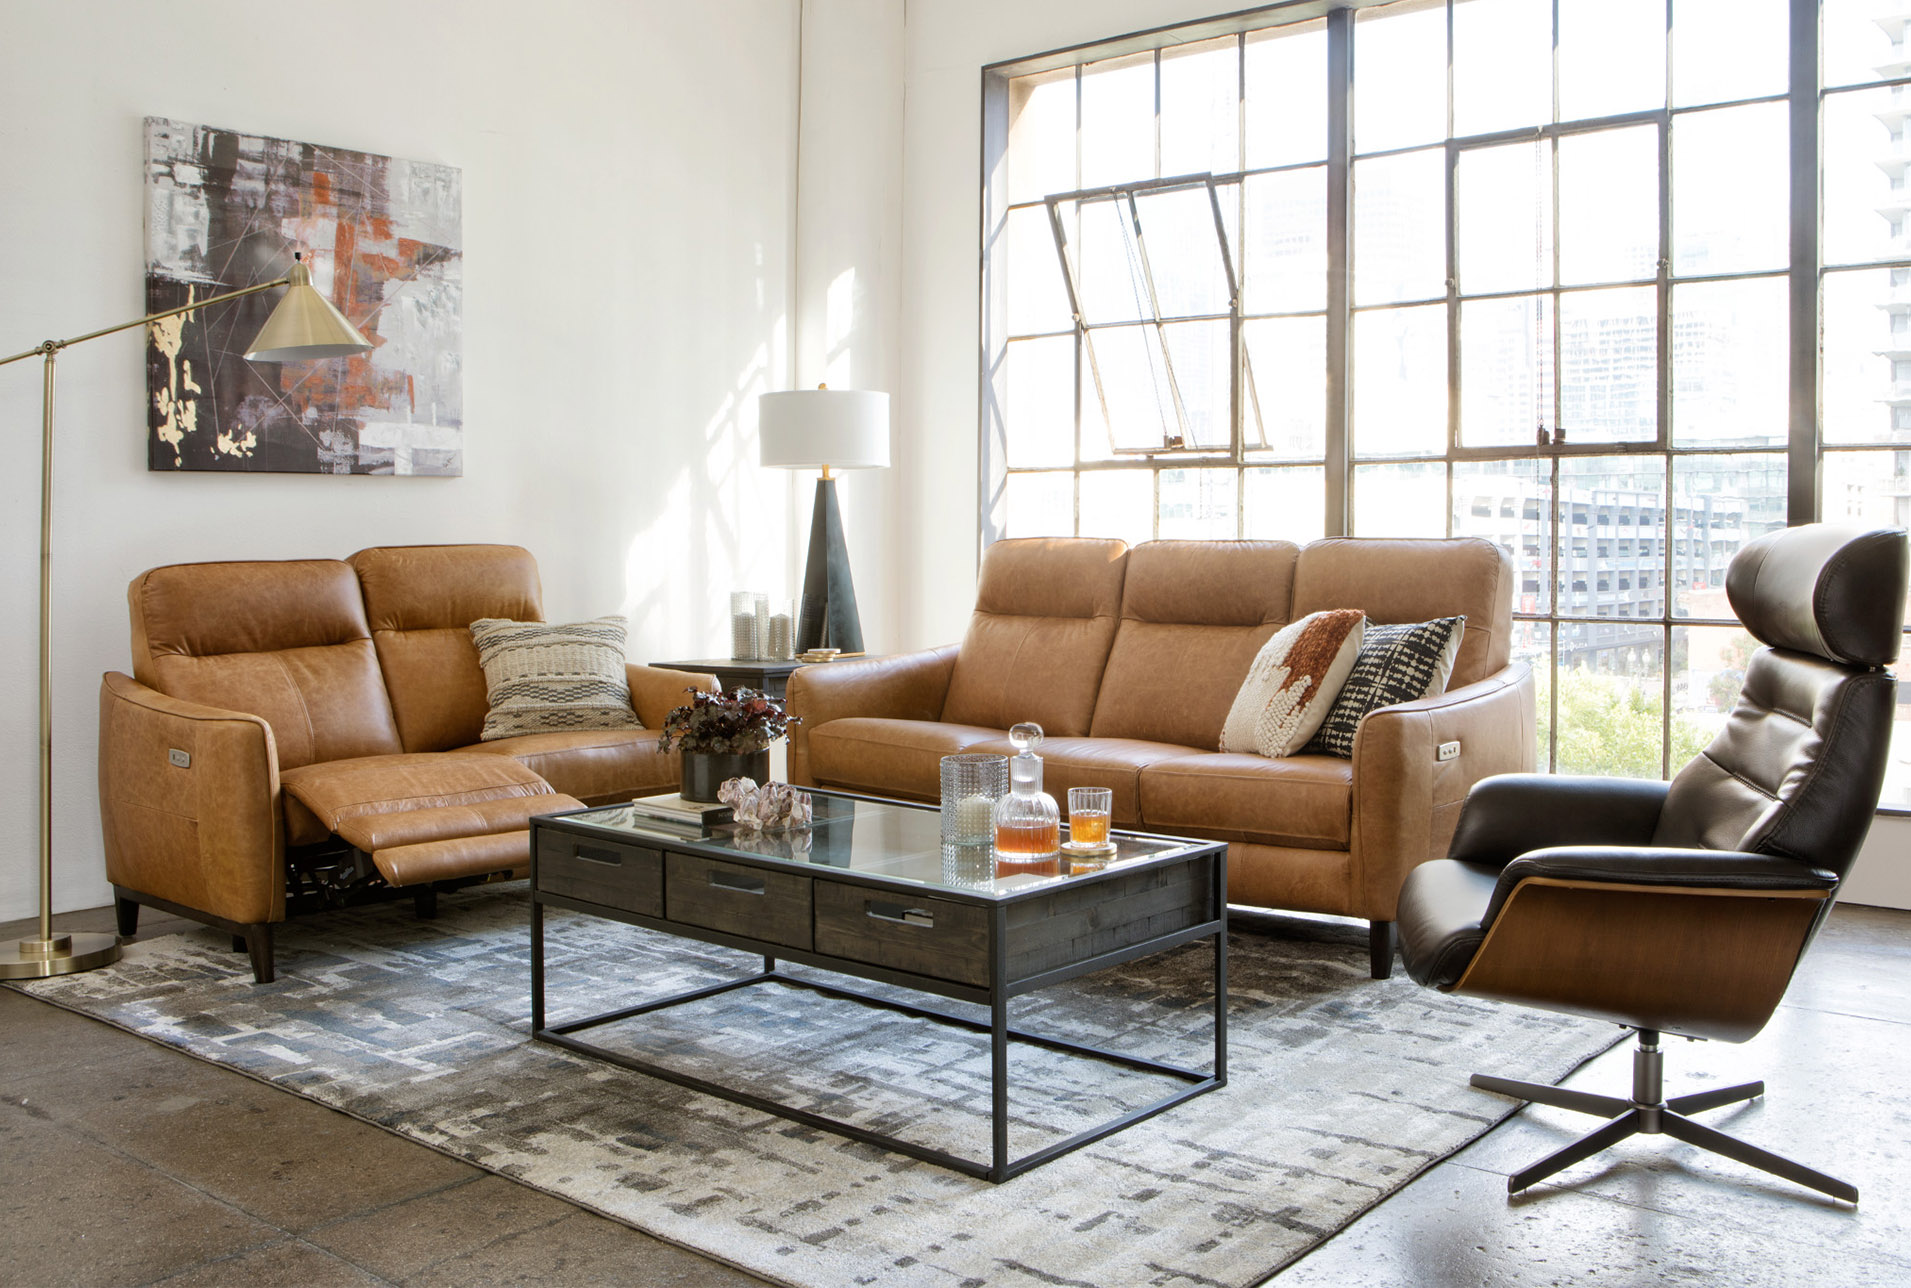 leather swivel chairs for living room